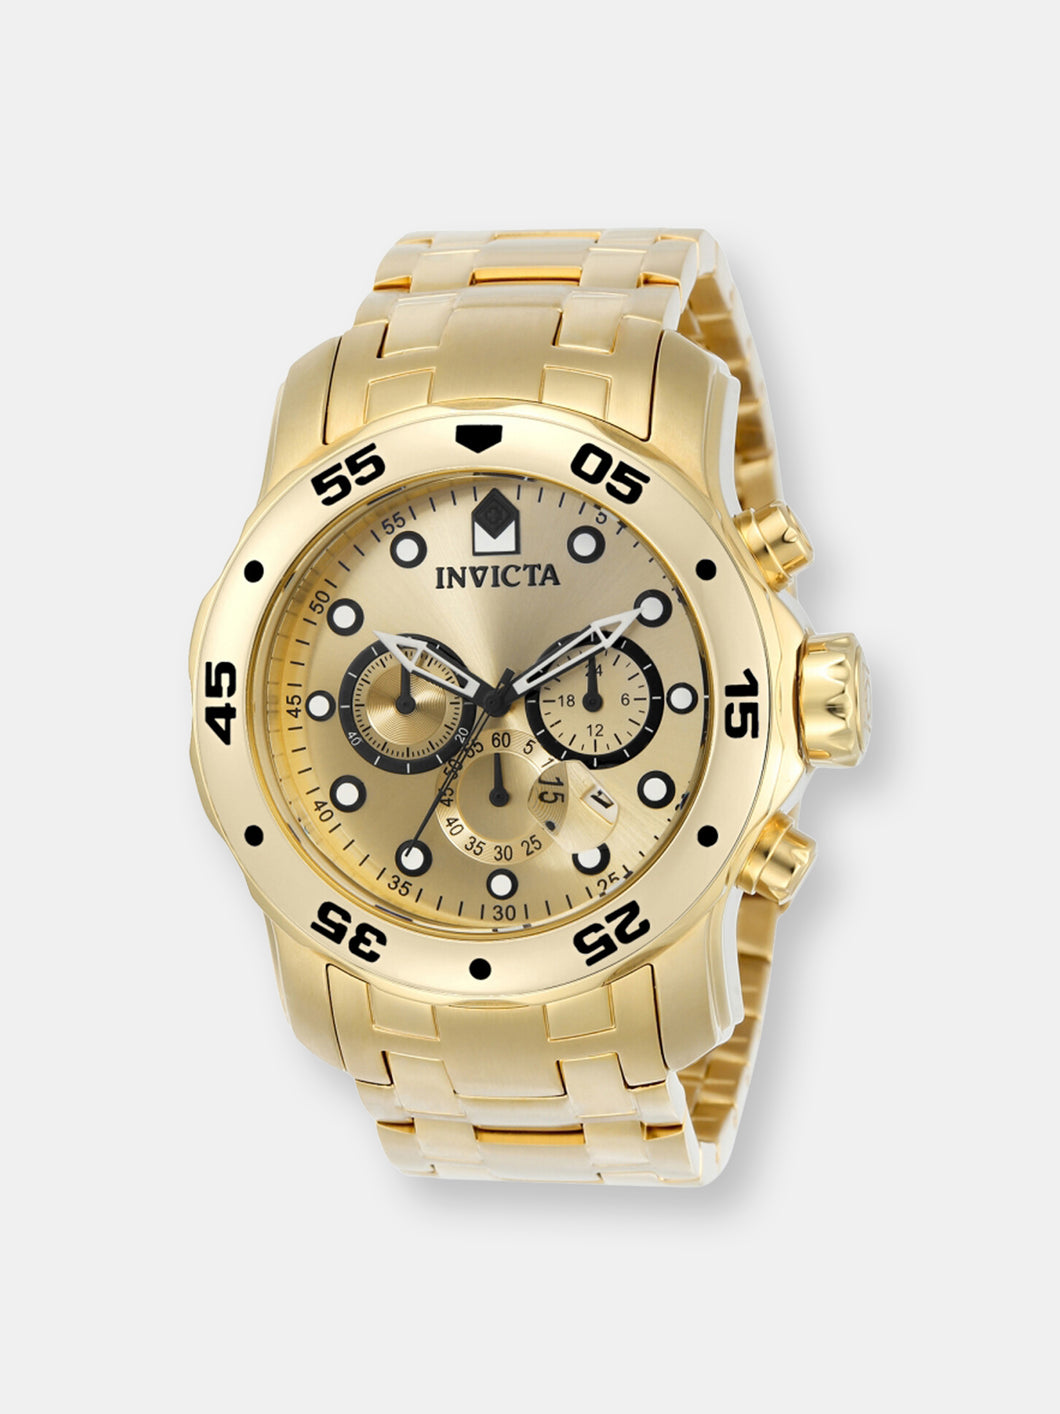 Invicta Men's Pro Diver 0074 Gold Stainless-Steel Plated Swiss Parts Quartz Fashion Watch